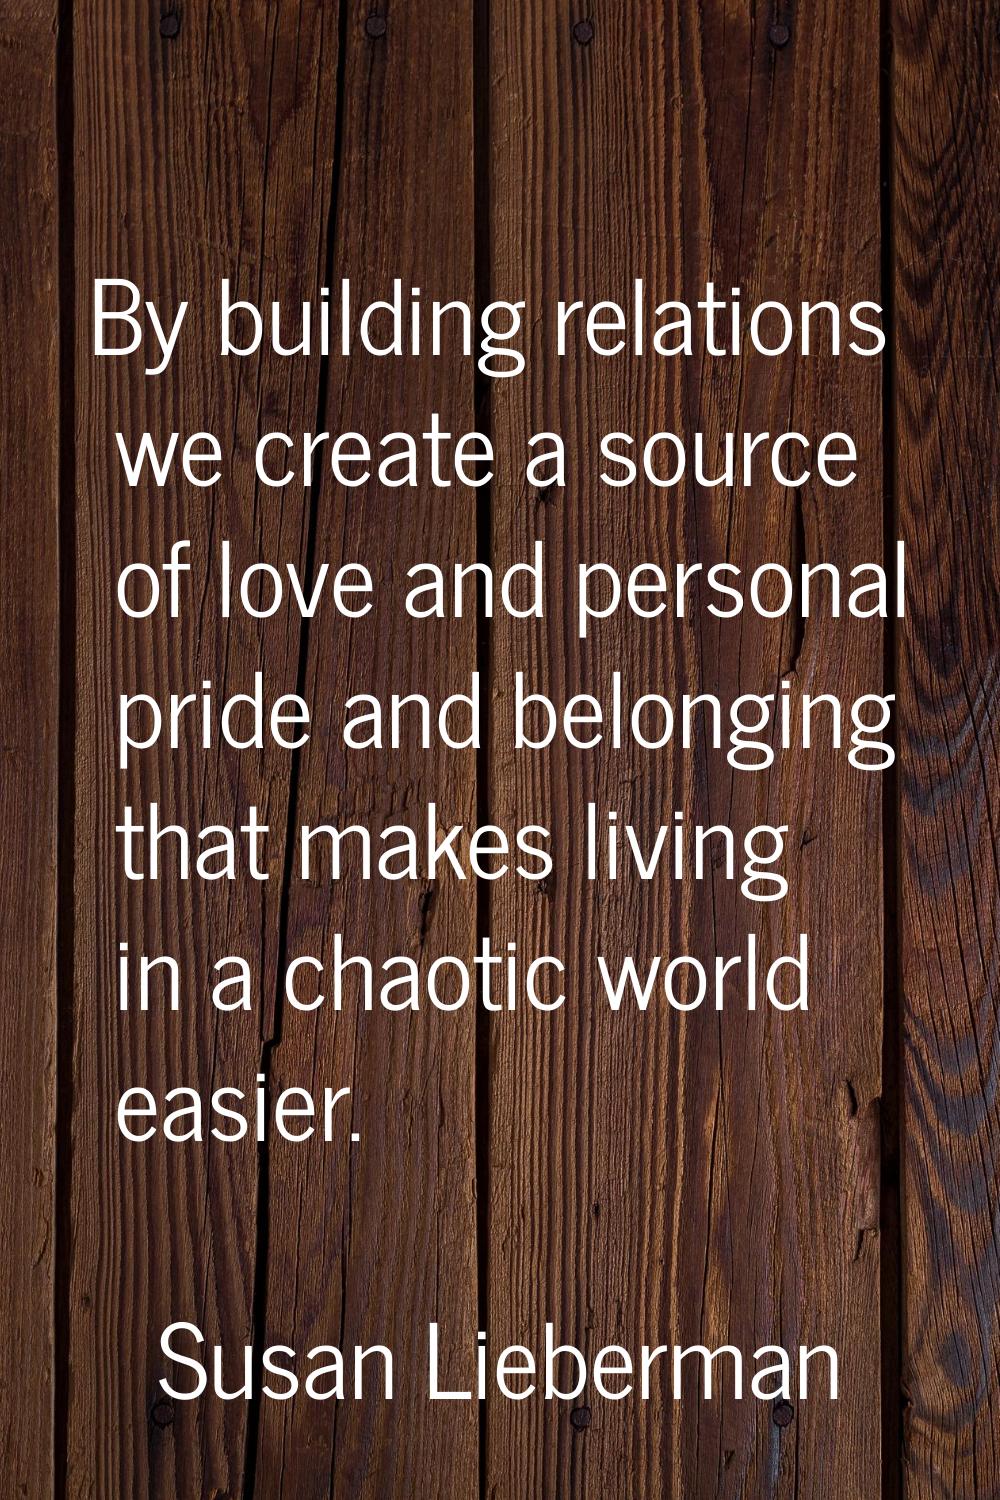 By building relations we create a source of love and personal pride and belonging that makes living